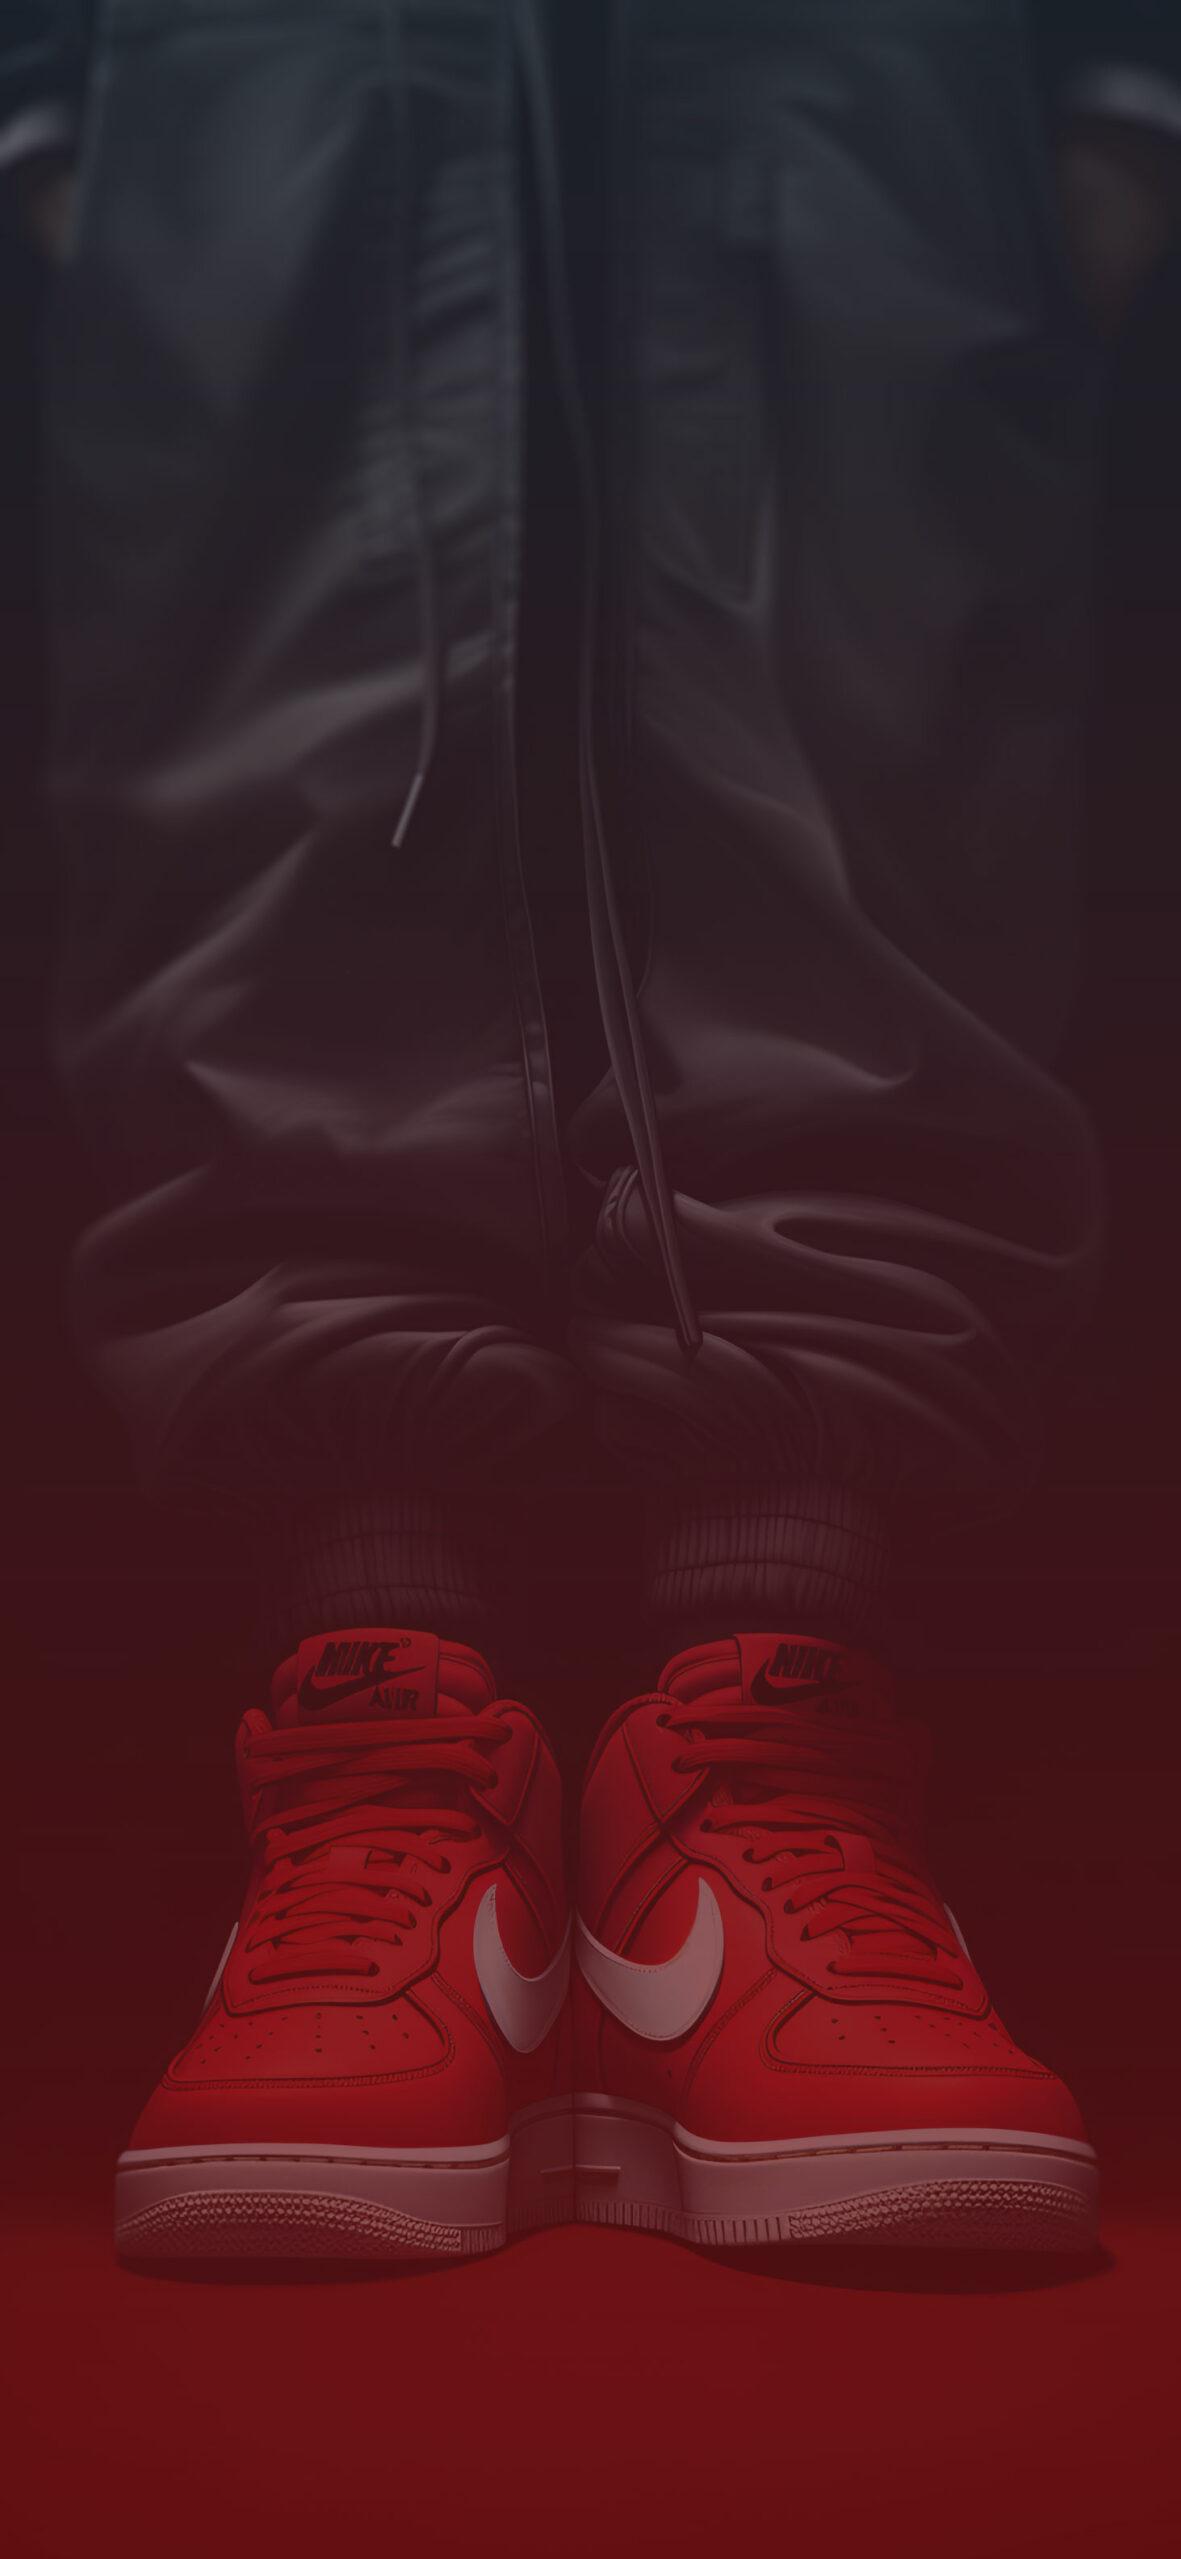 Hypebeast Cool Red Nike Sneakers Wallpaper Fashion